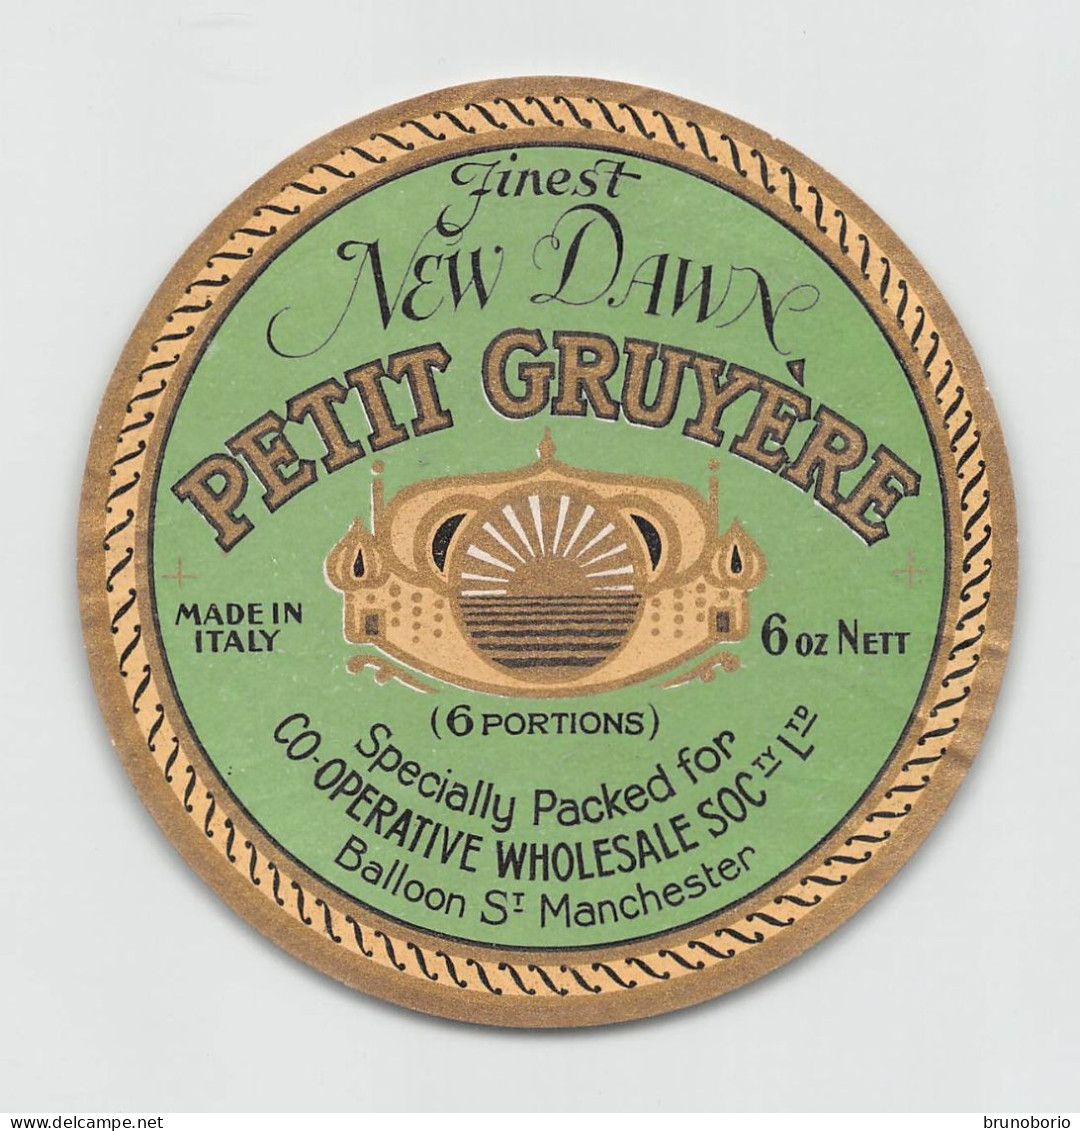 00120 "FINEST NEW DAWN-PETIT GRUYERE SPECIALLY PACKED FOR C0-OPERATIVE WHOLESALE SOC-BALLOON ST. MANCHESTER" ETICH.ORIG - Fromage